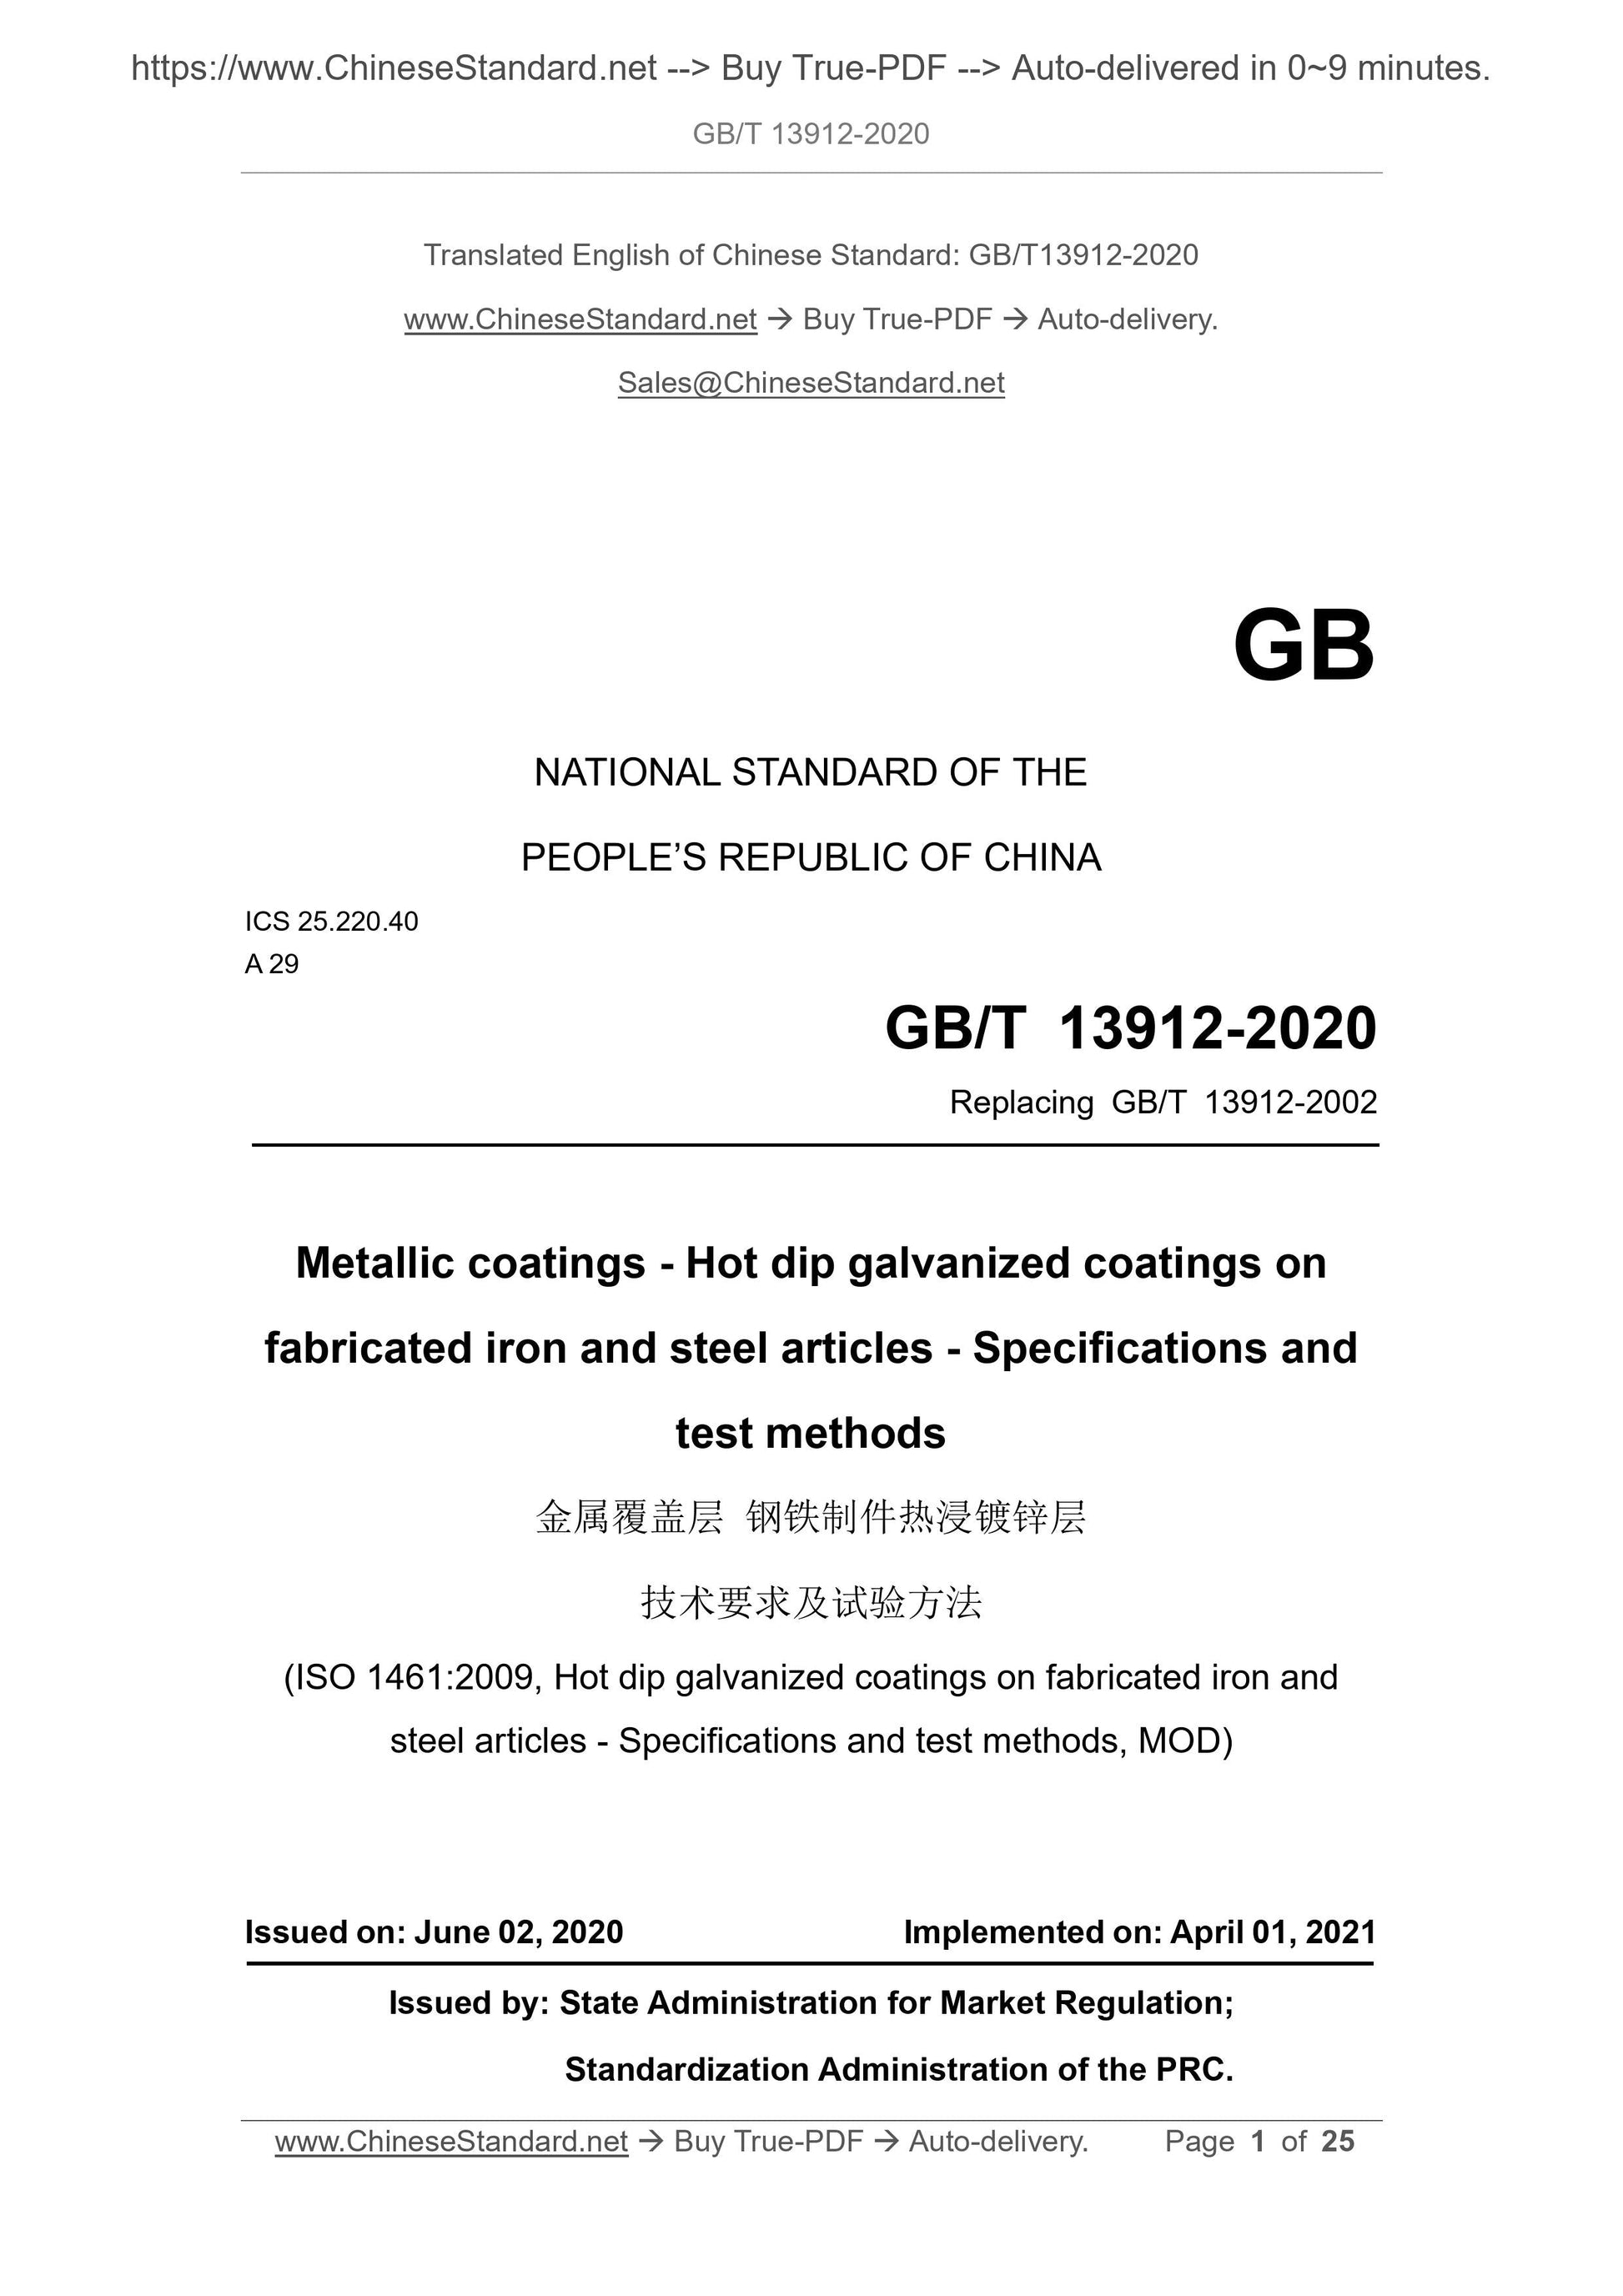 GB/T 13912-2020 Page 1